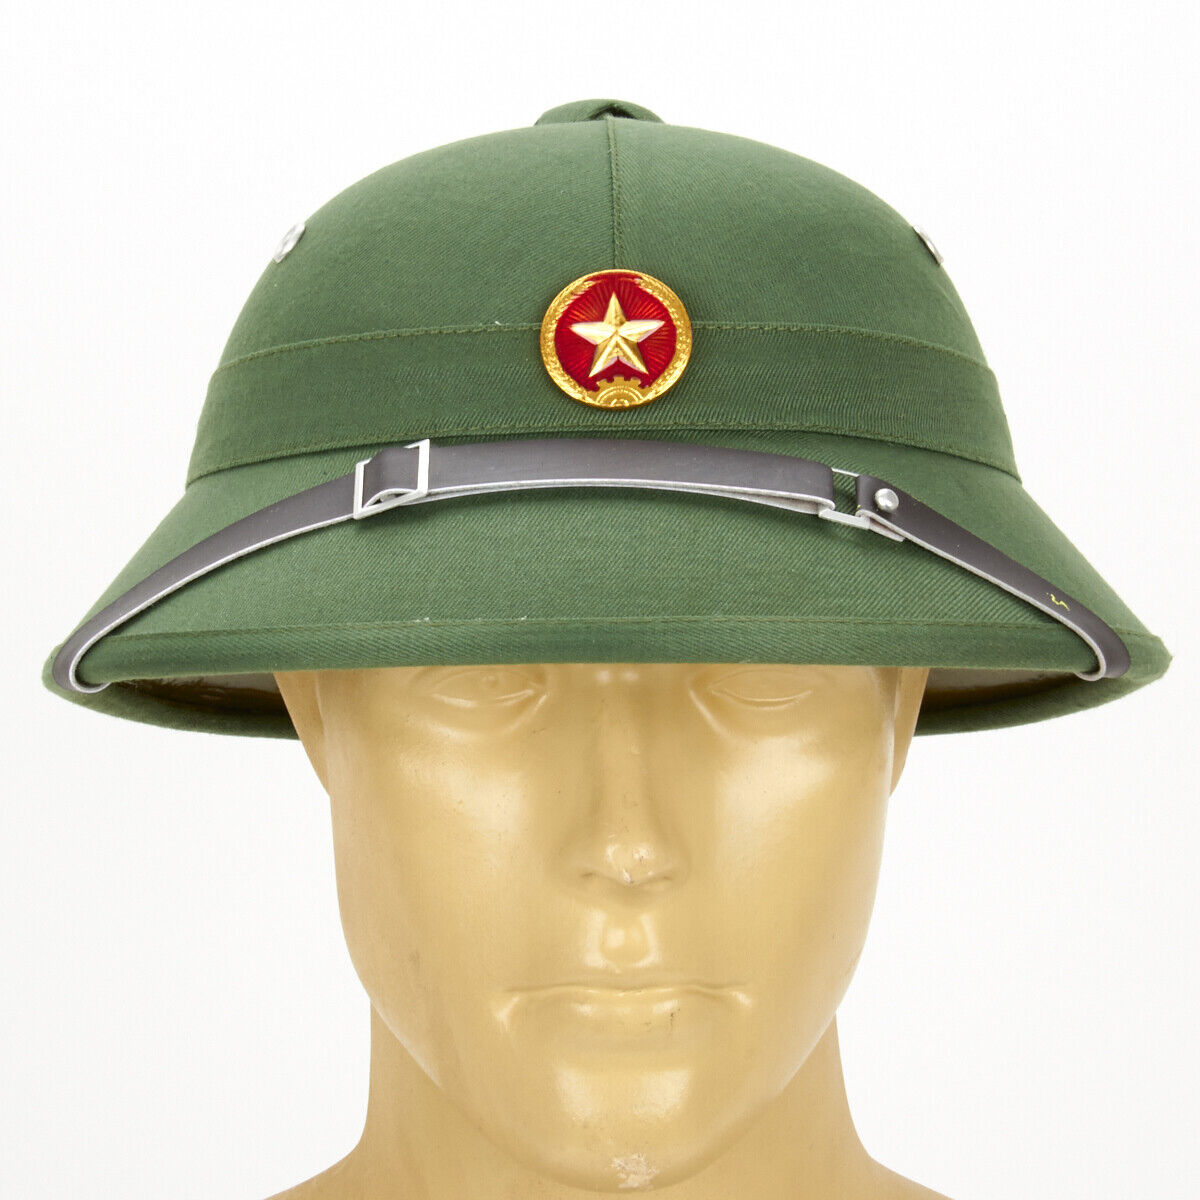 North Vietnamese Army Vietcong Pith Helmet with Red Star Badge